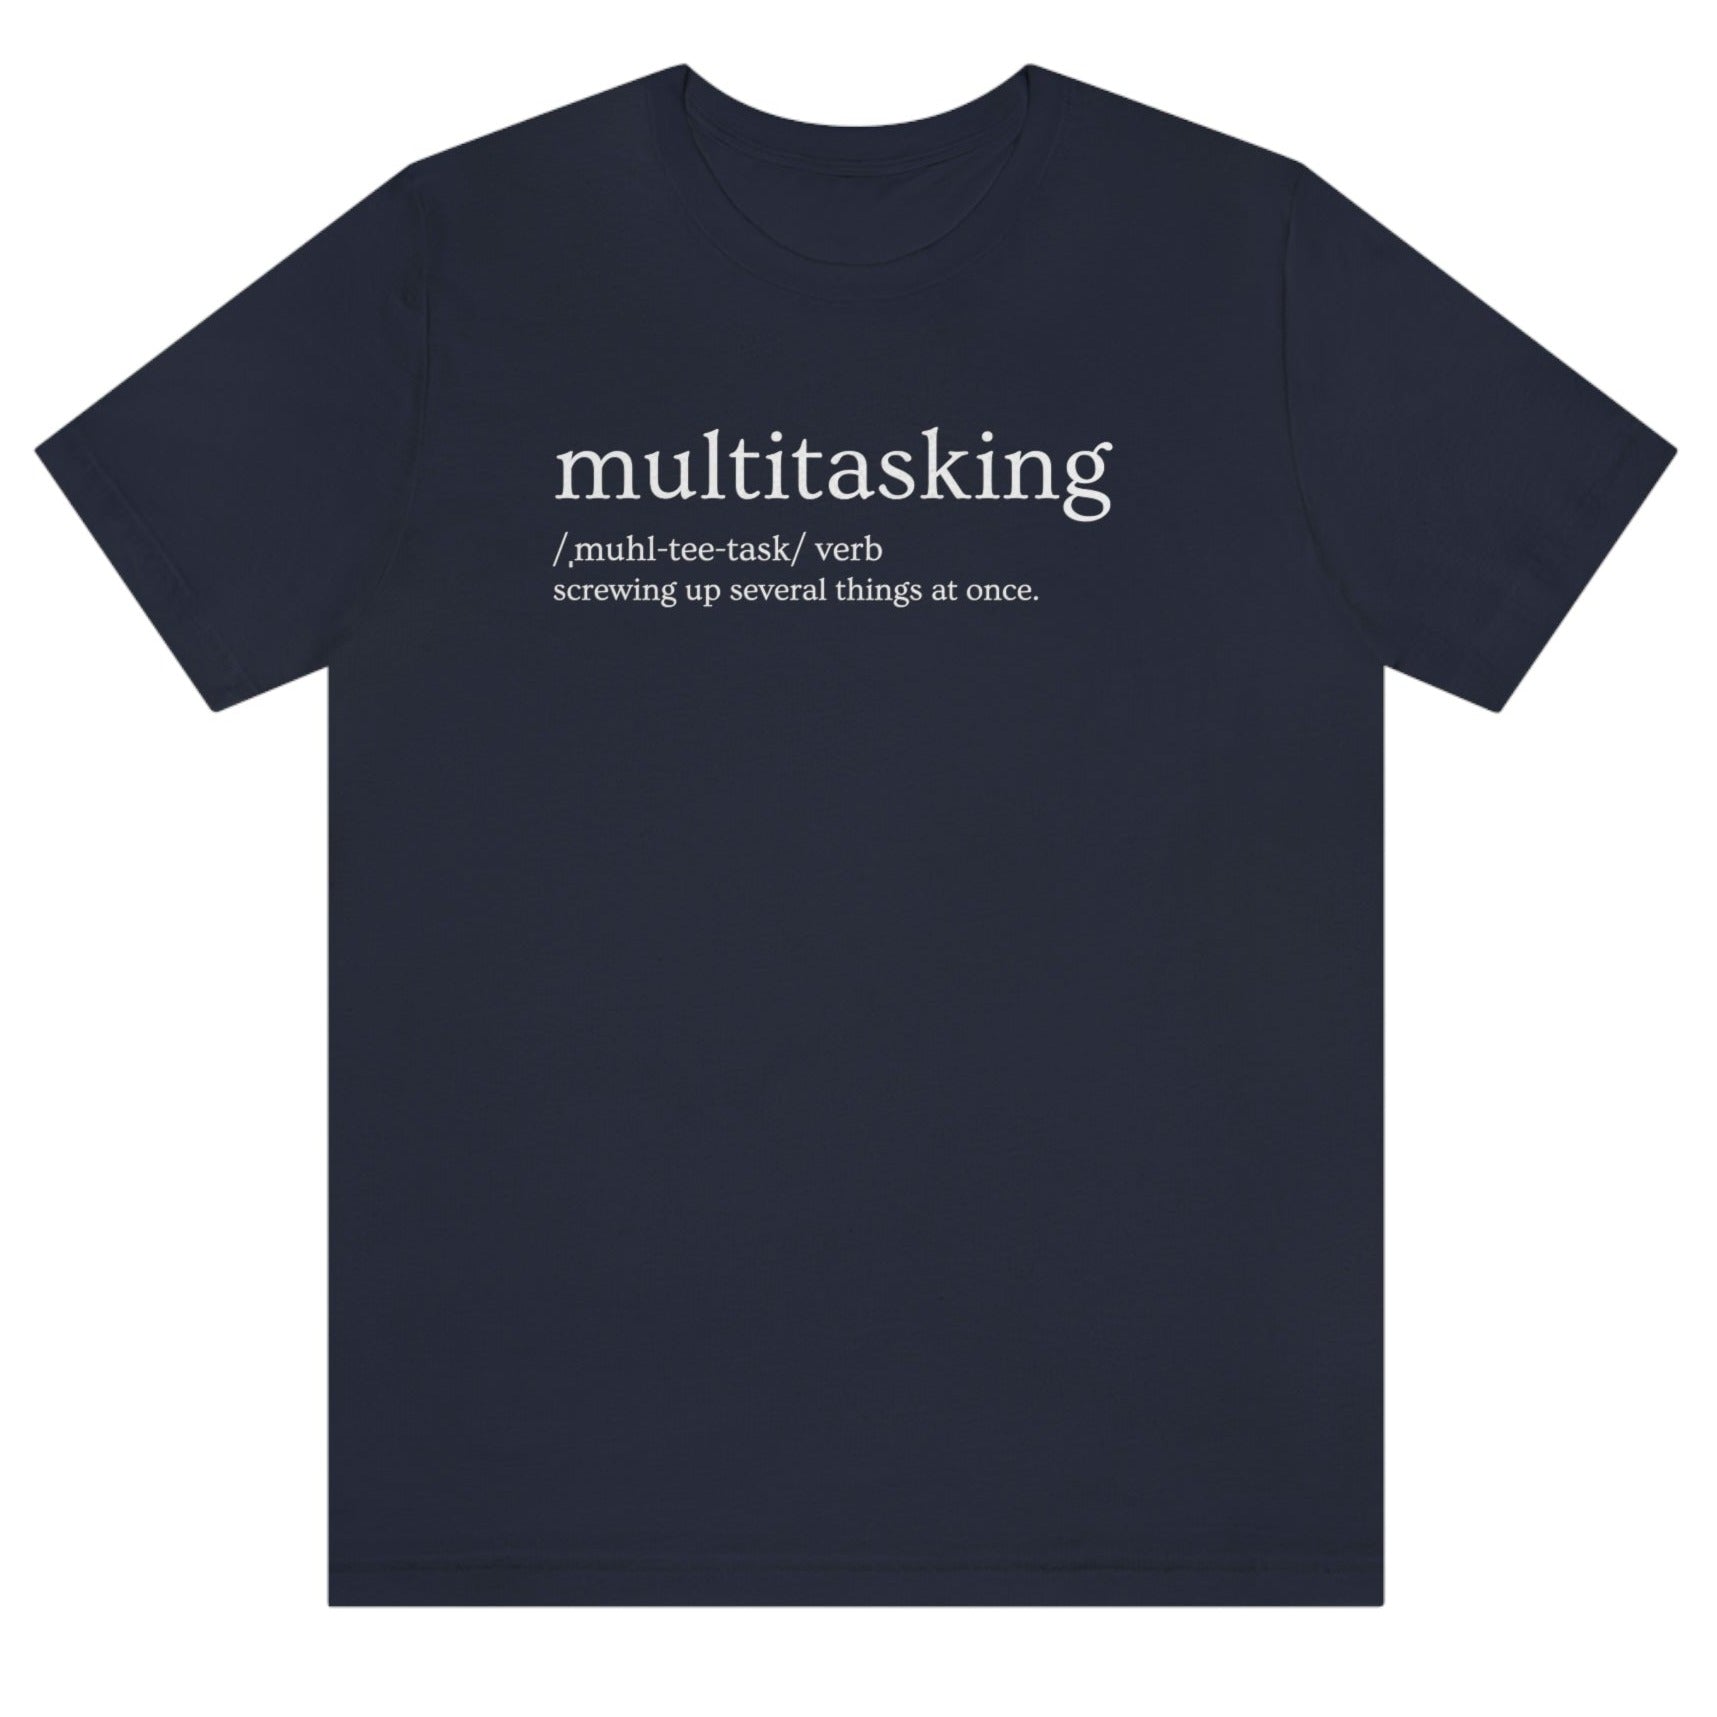 multitasking-screwing-up-several-things-at-once-navy-t-shirt